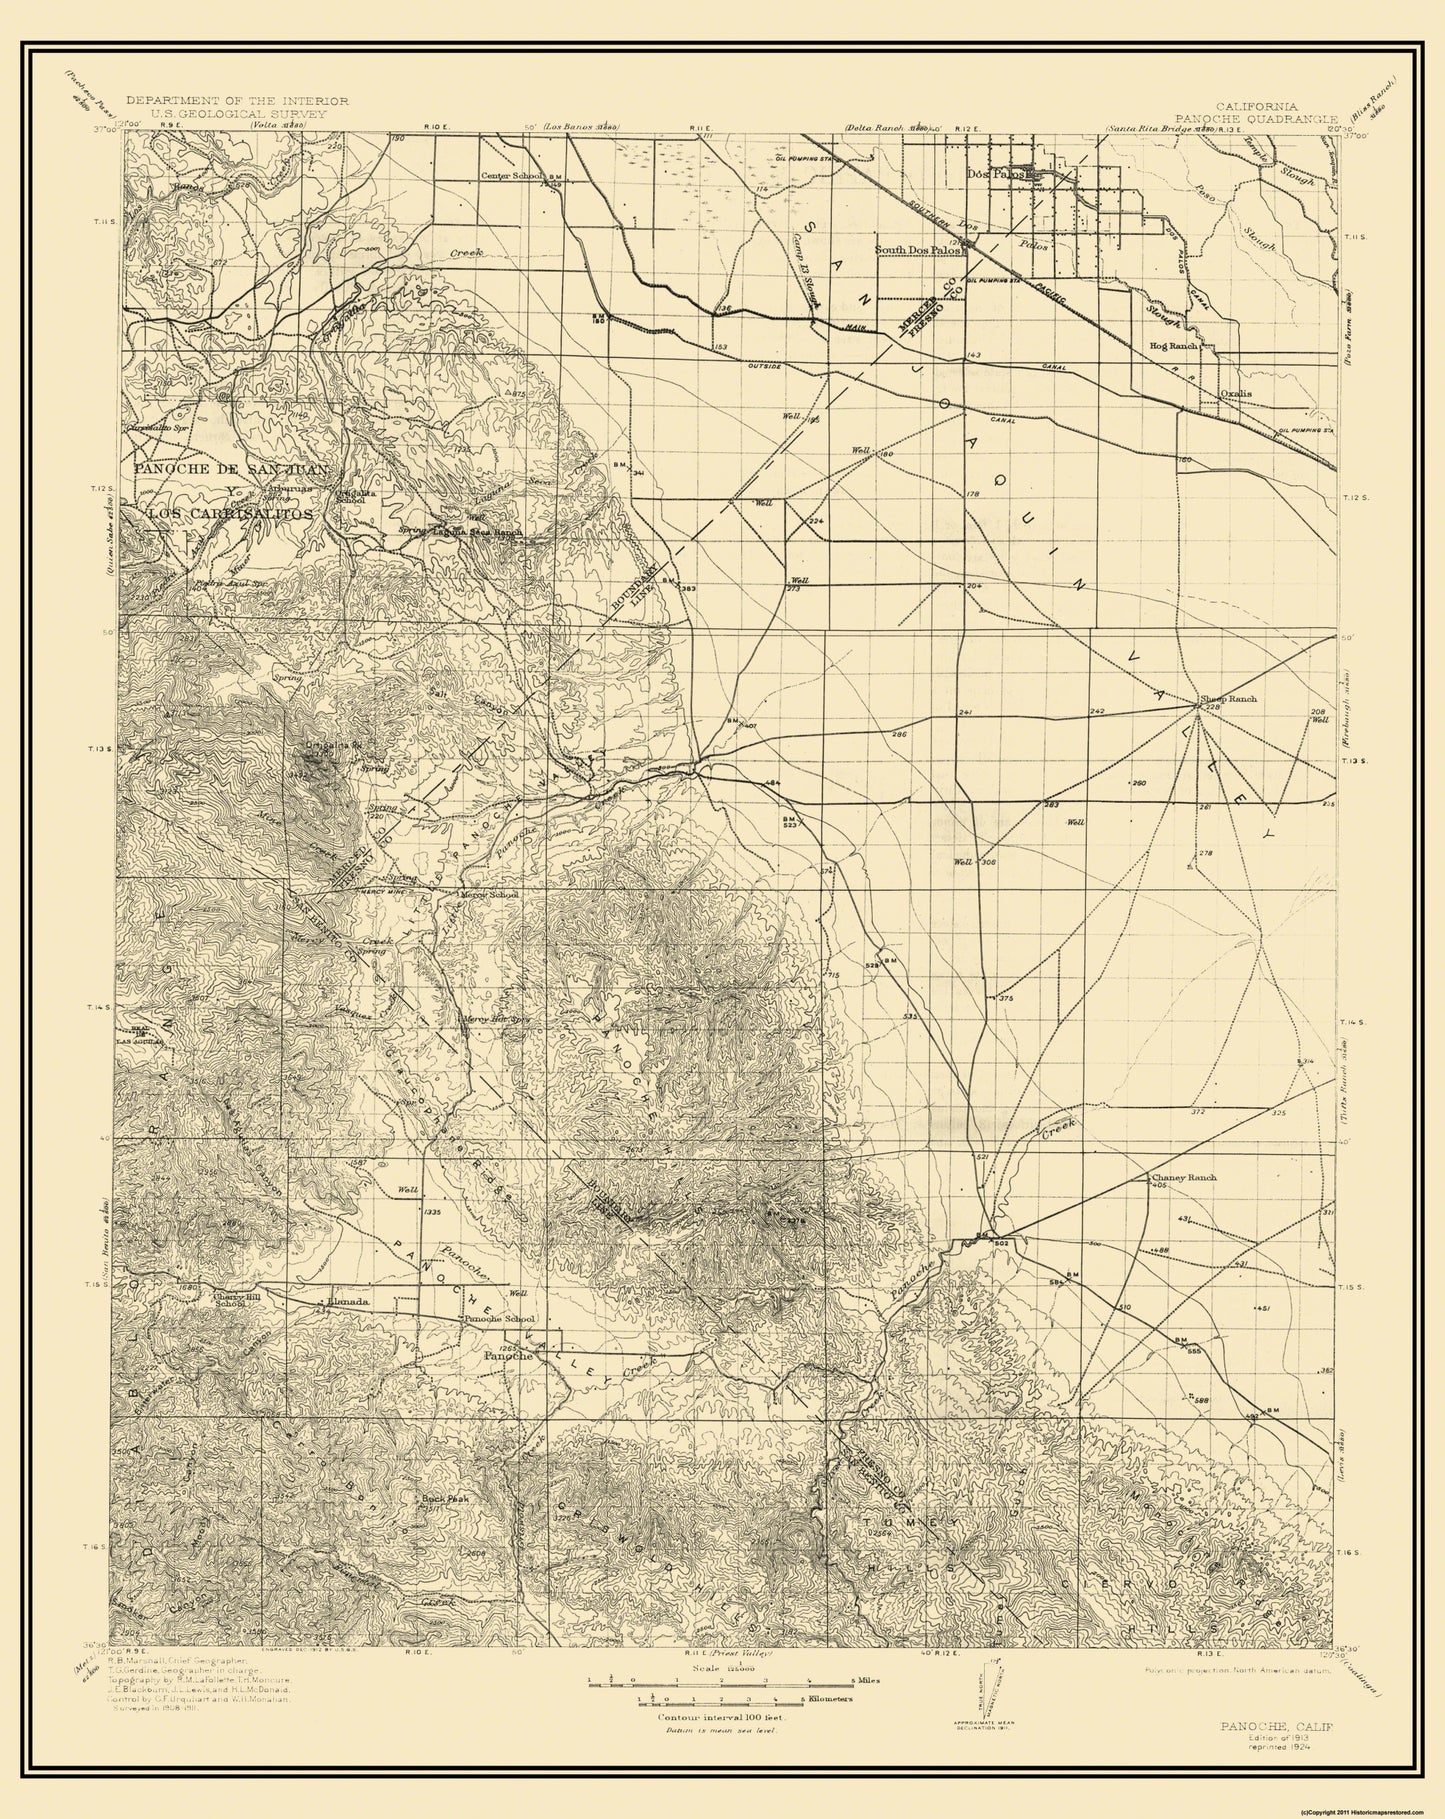 Topographical Map - Panoche California Quad - USGS 1913 - 23 x 28.94 - Vintage Wall Art